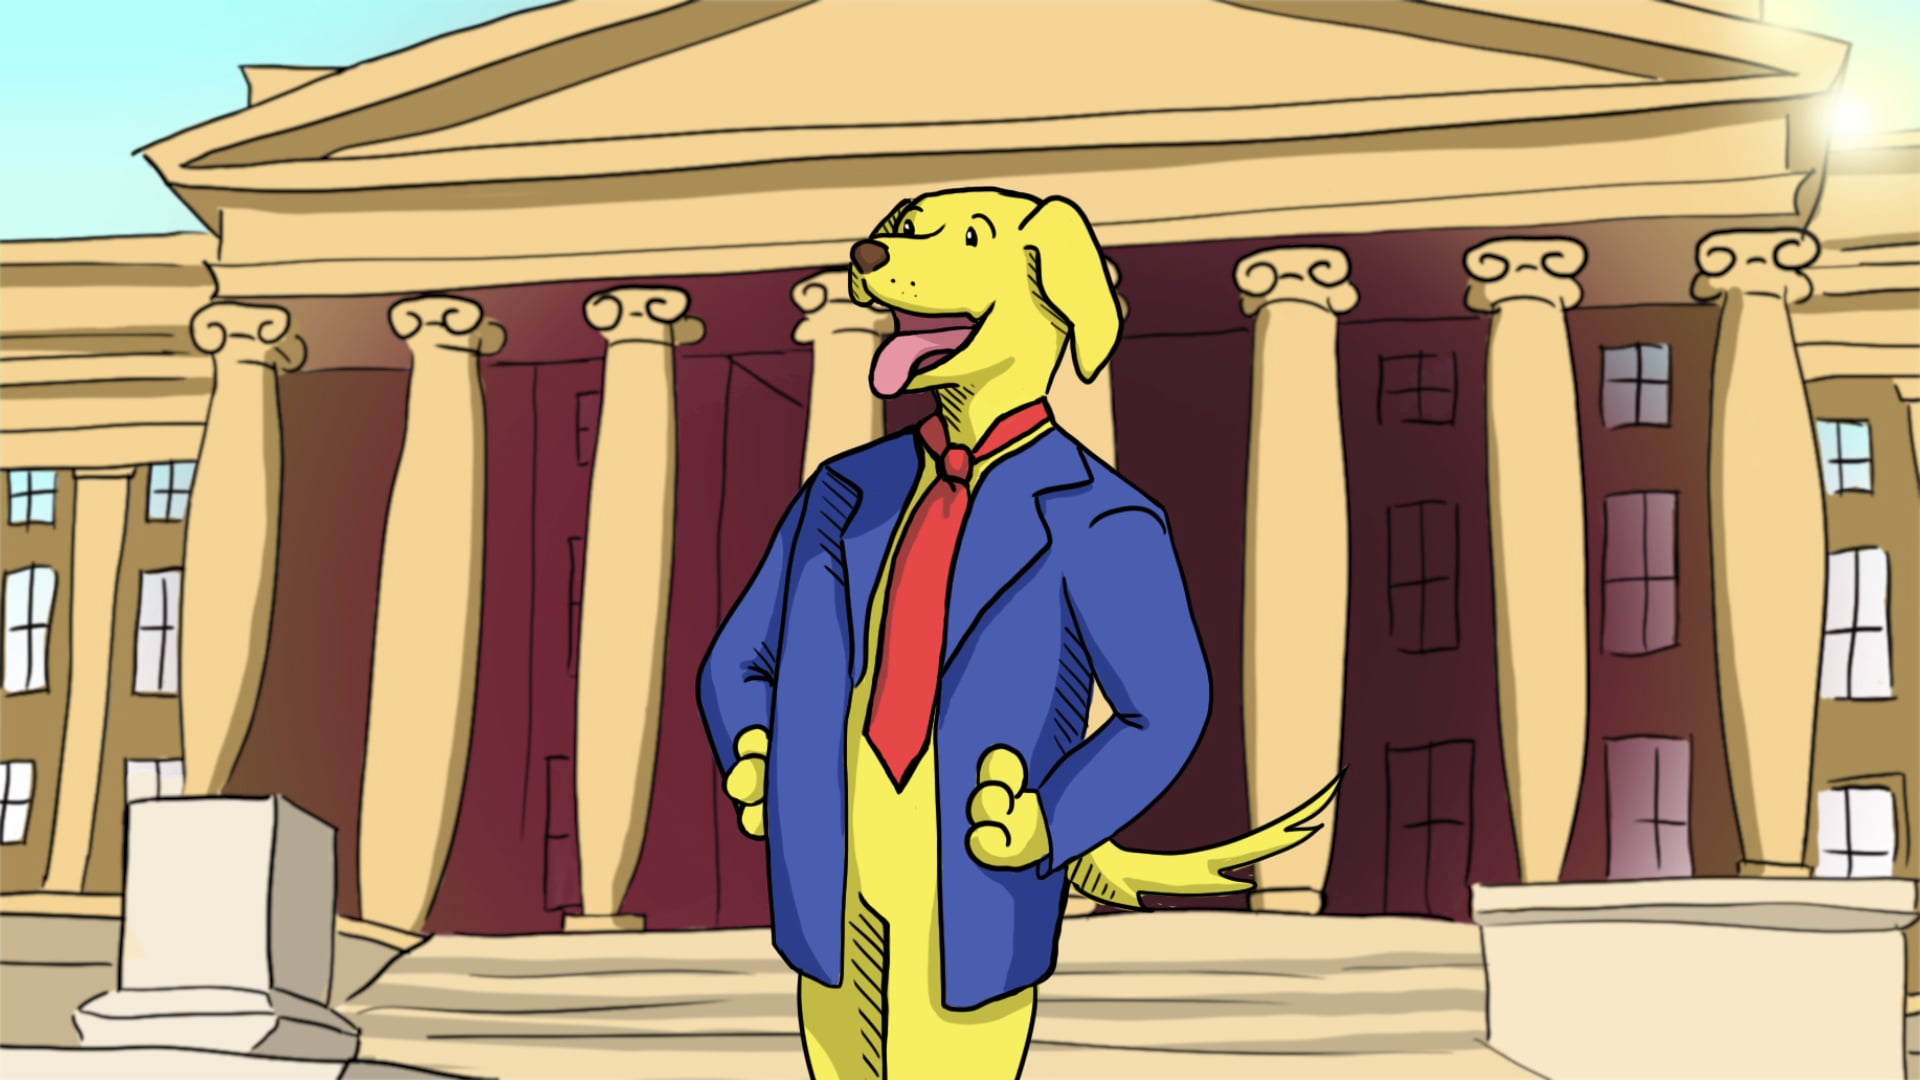 A dog wearing a blue blazer and red tie stands in front of a government building.